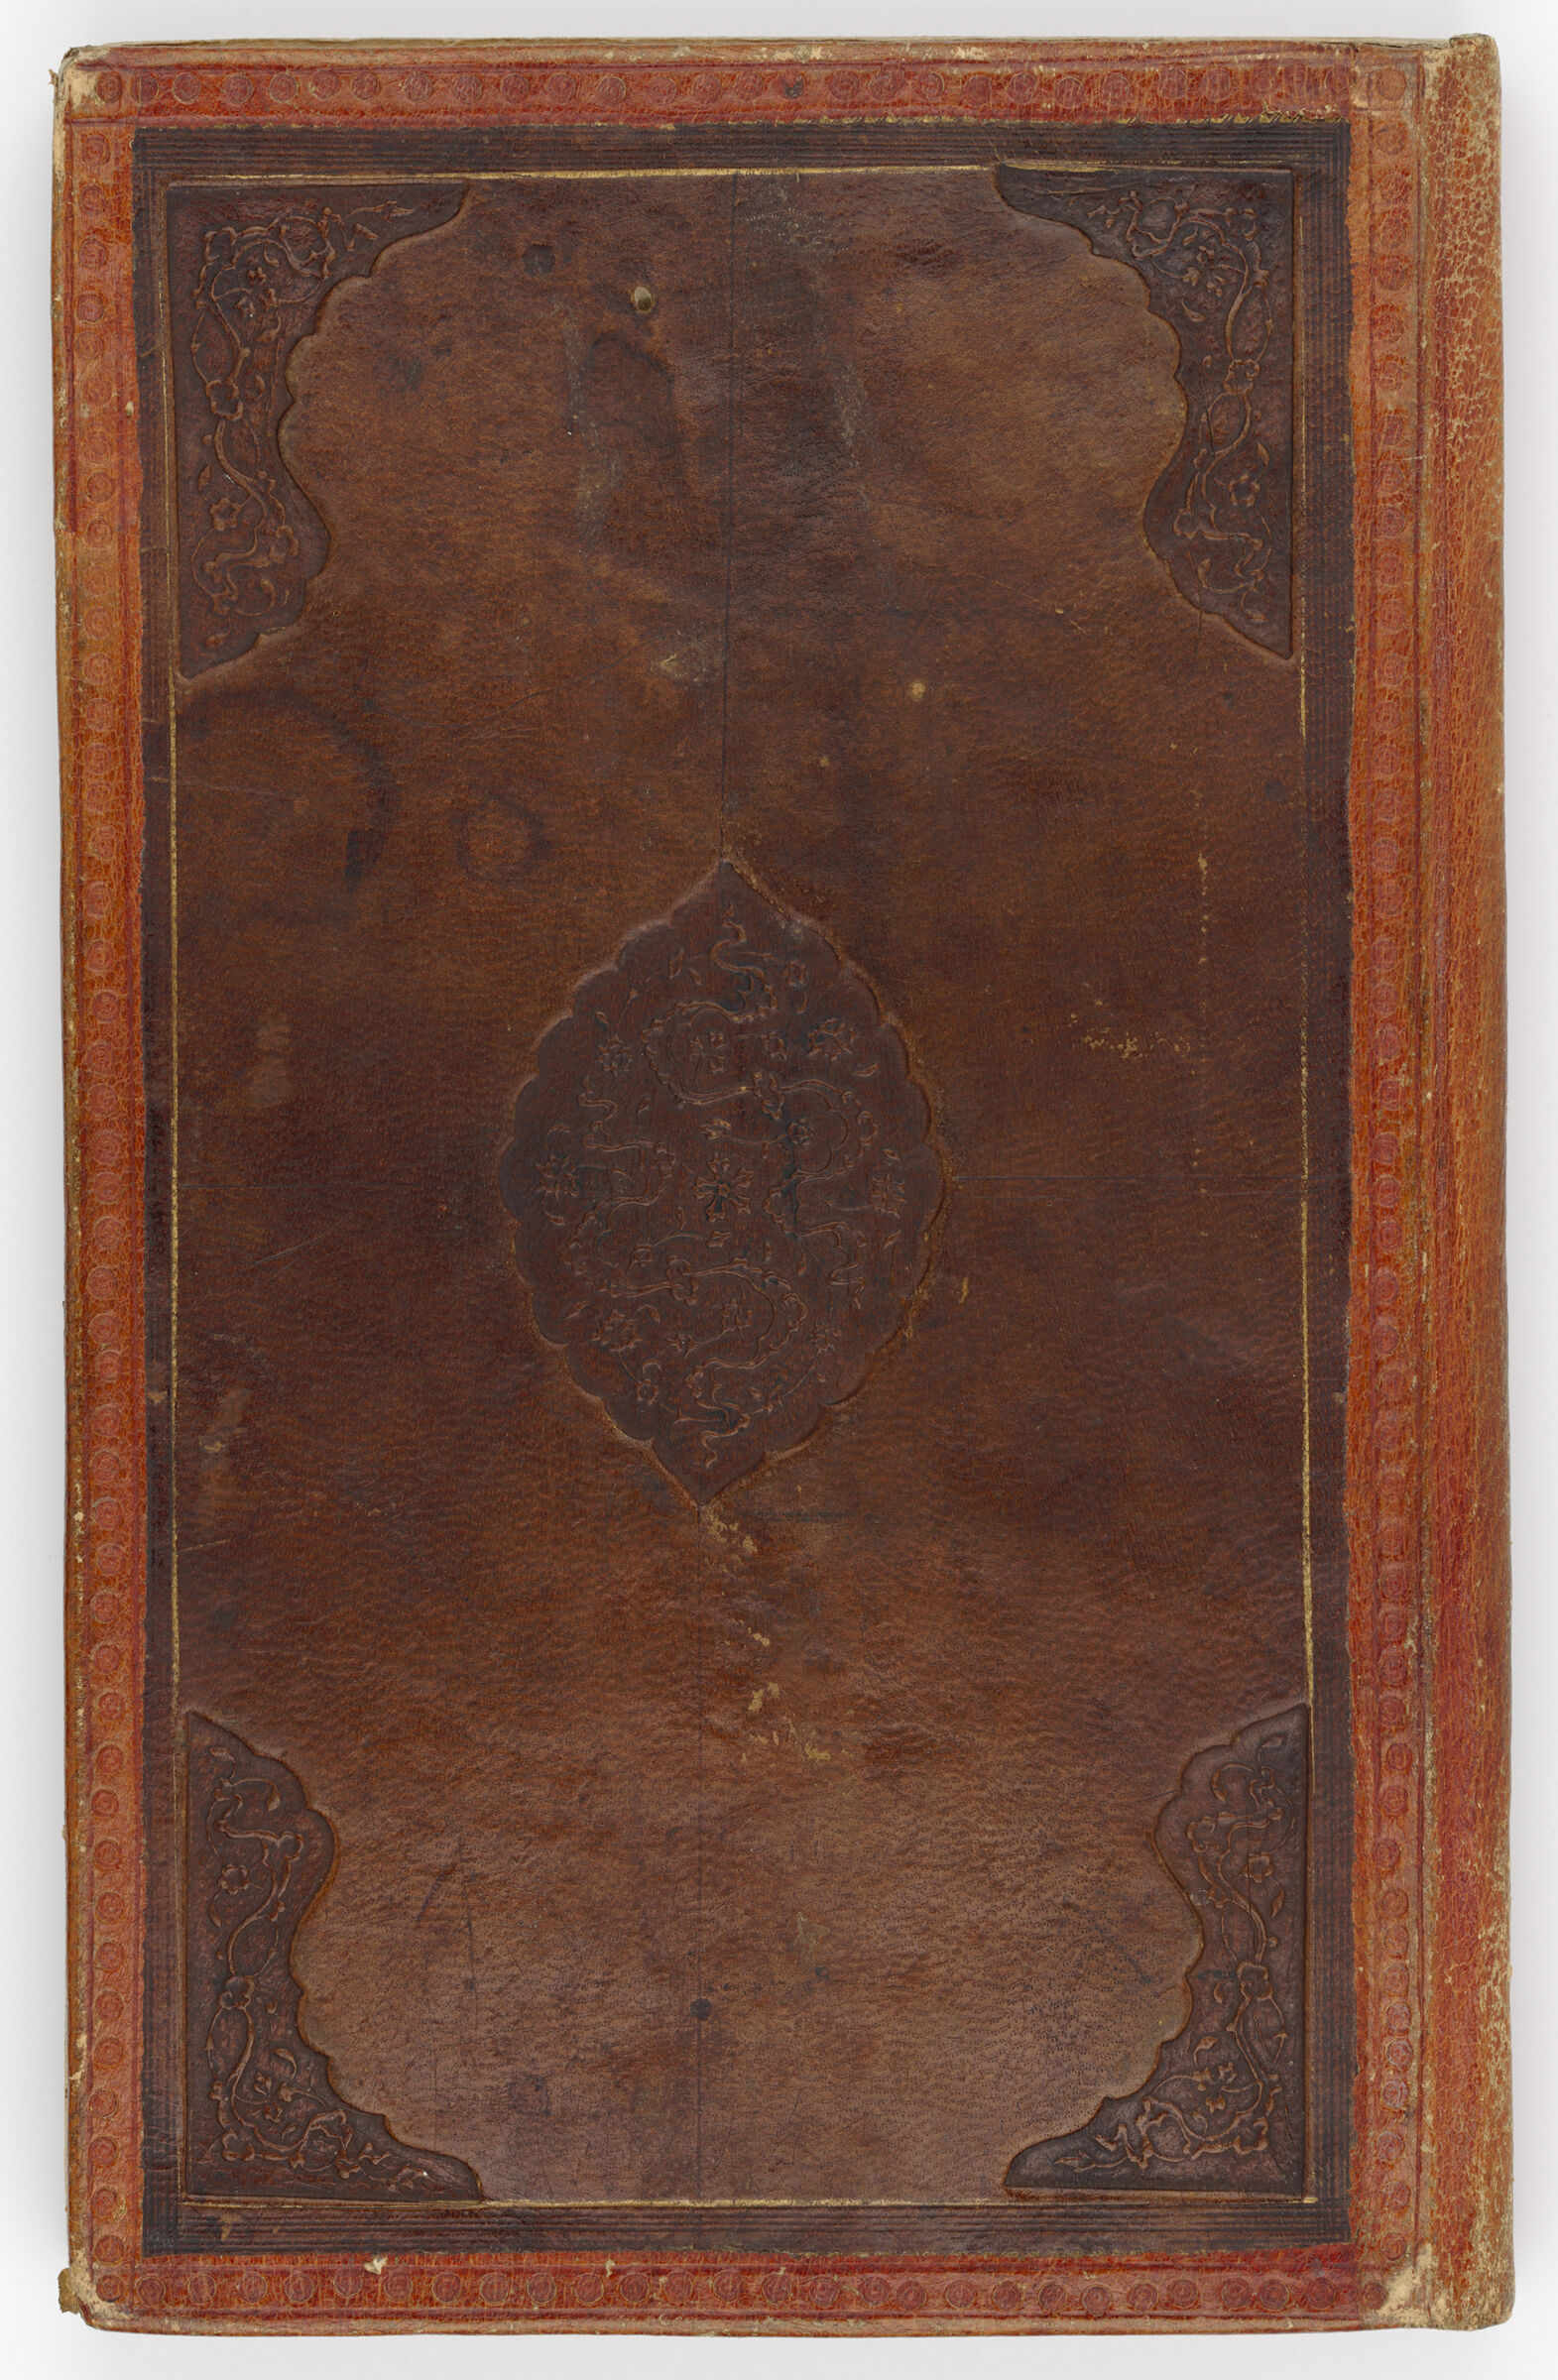 Illustrated Manuscript Of The Subhat Al-Abrar (From Haft Awrang) By Jami